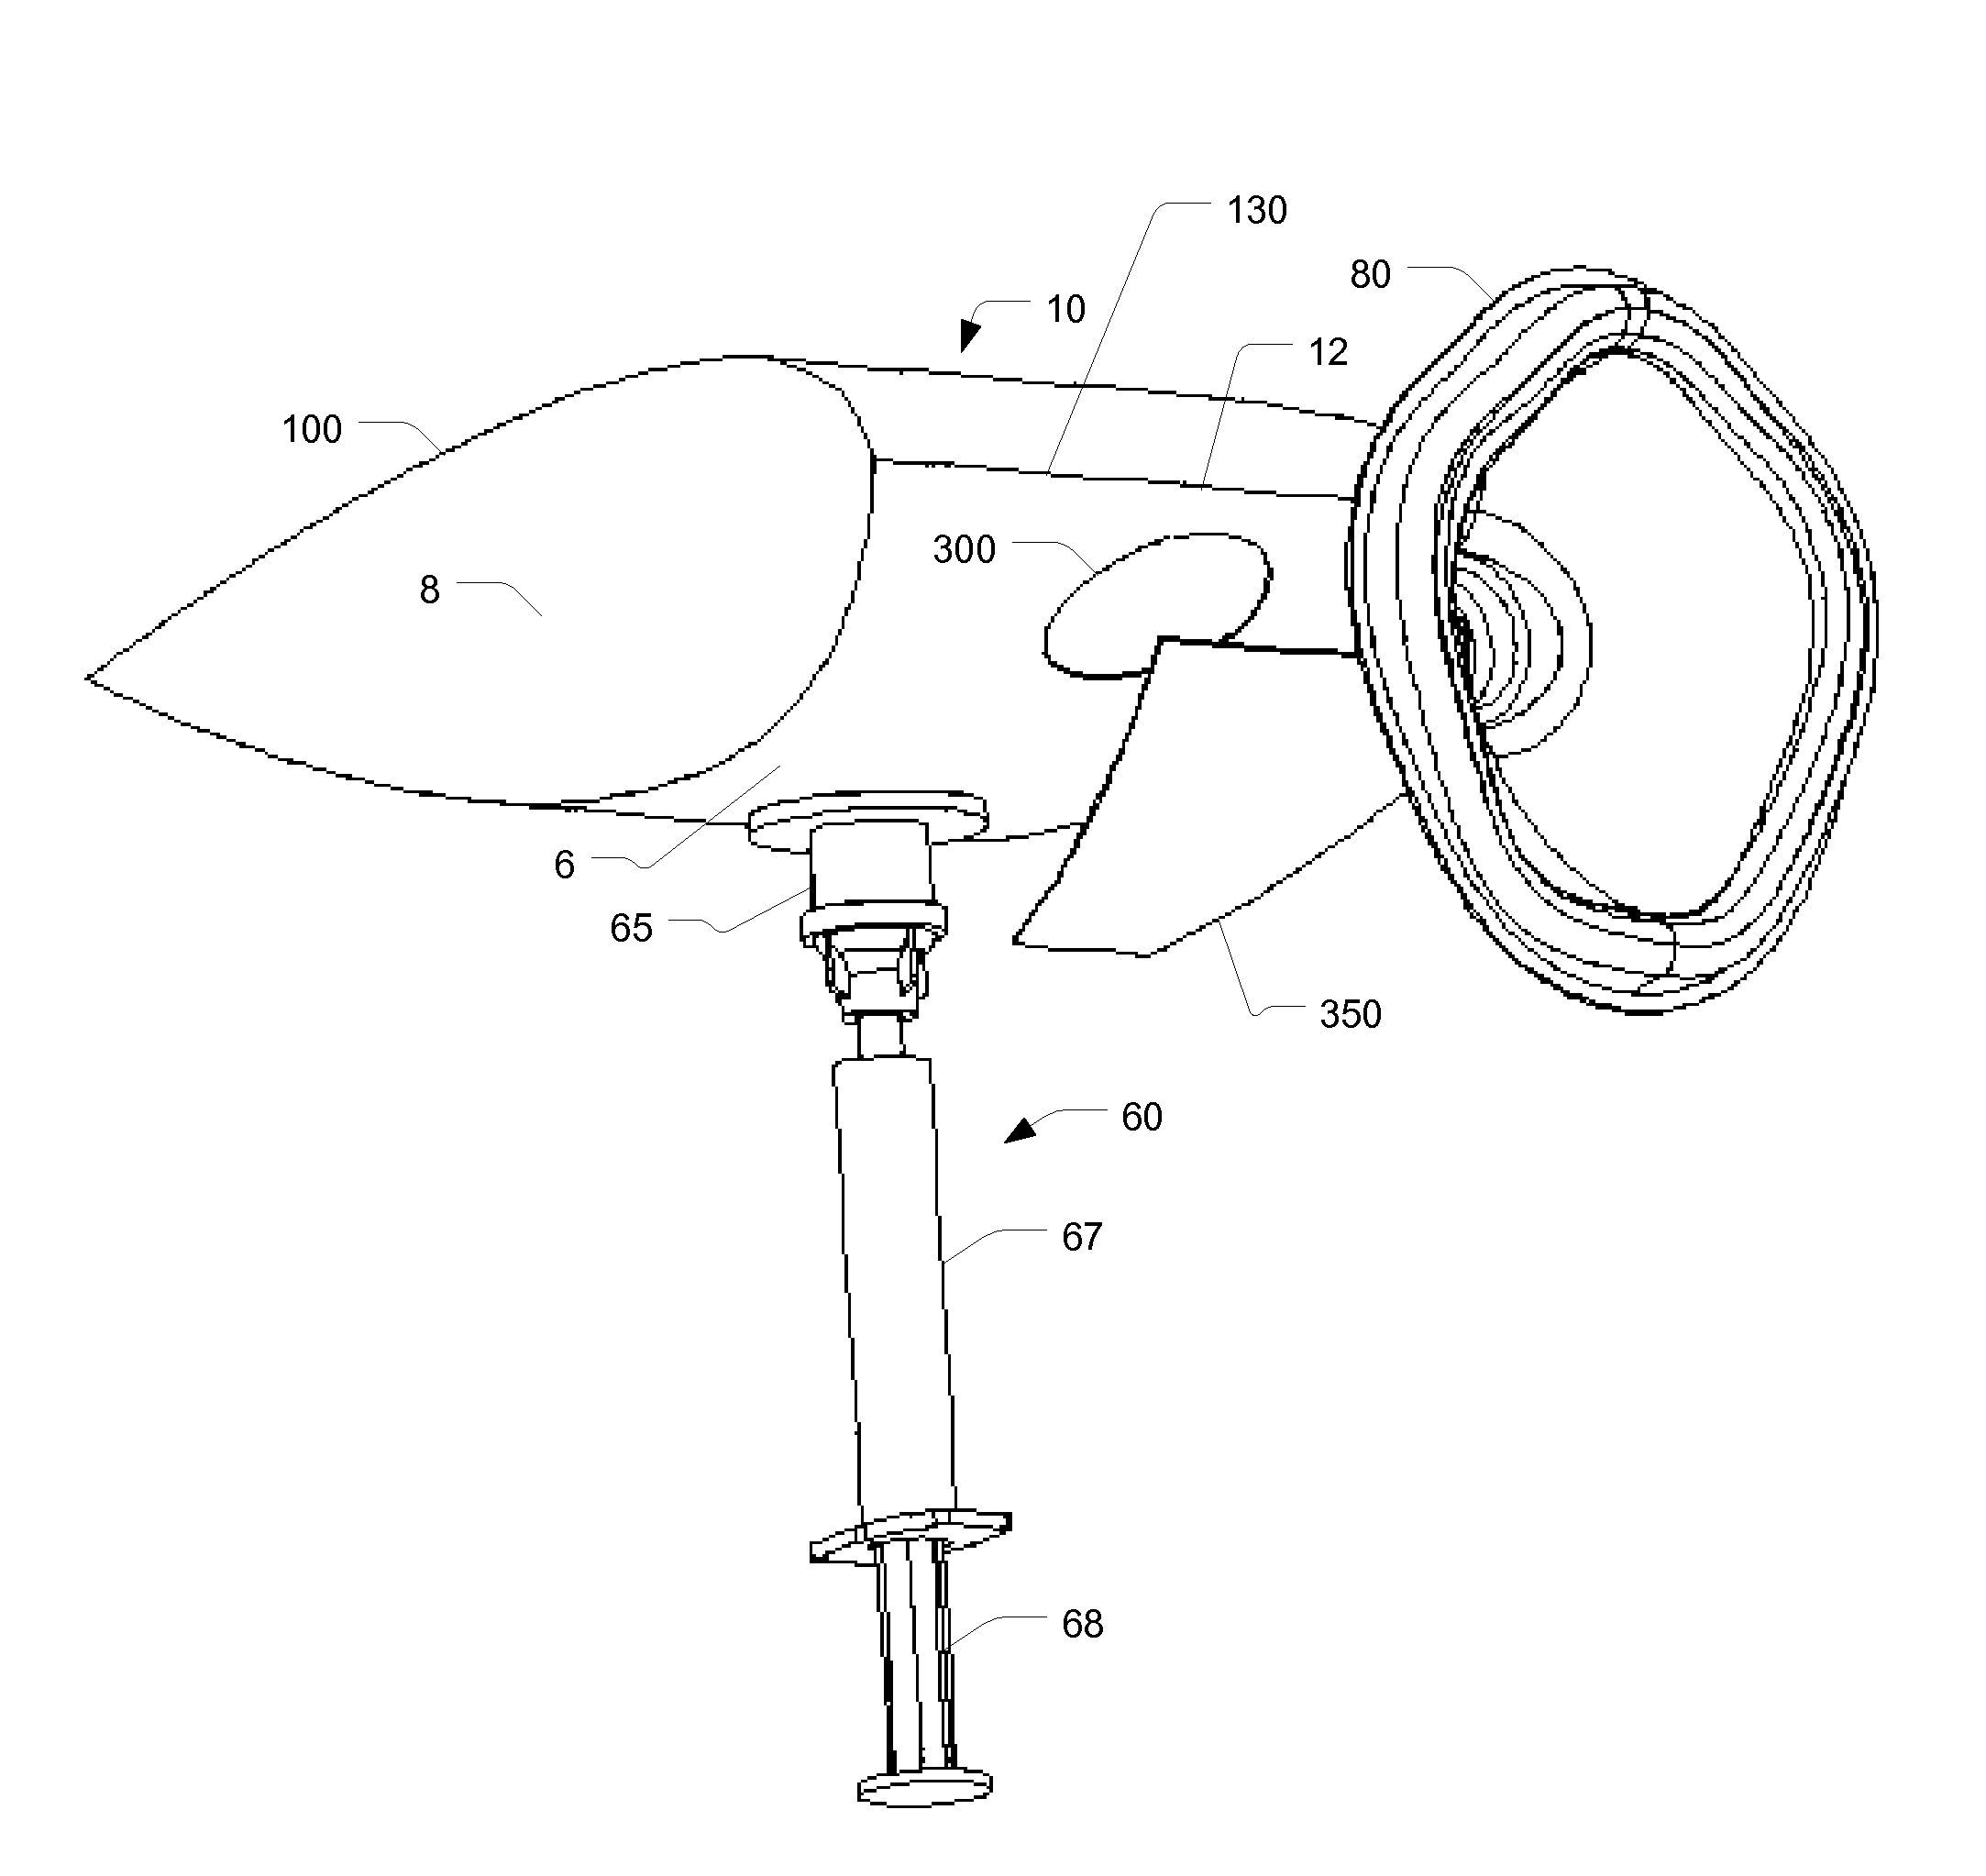 Disposable spacer for inhalation delivery of aerosolized drugs and vaccines